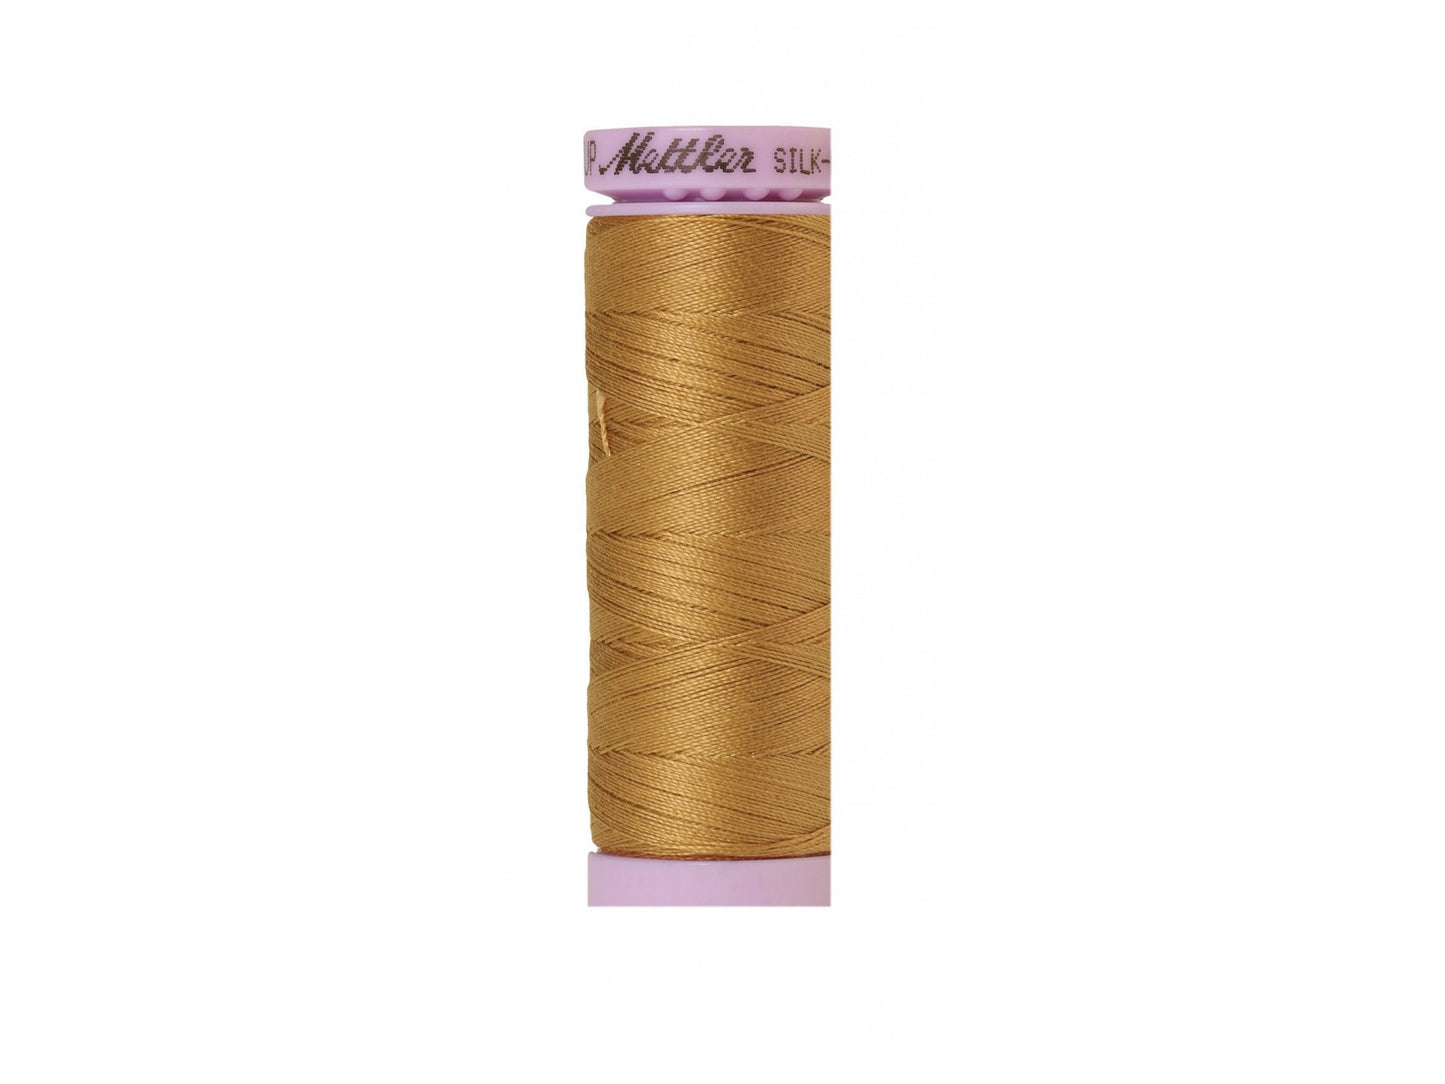 Mettler Silk Finish 50wt Cotton Thread - Sisal - color 0261 - 164yd/150m - old color 0830